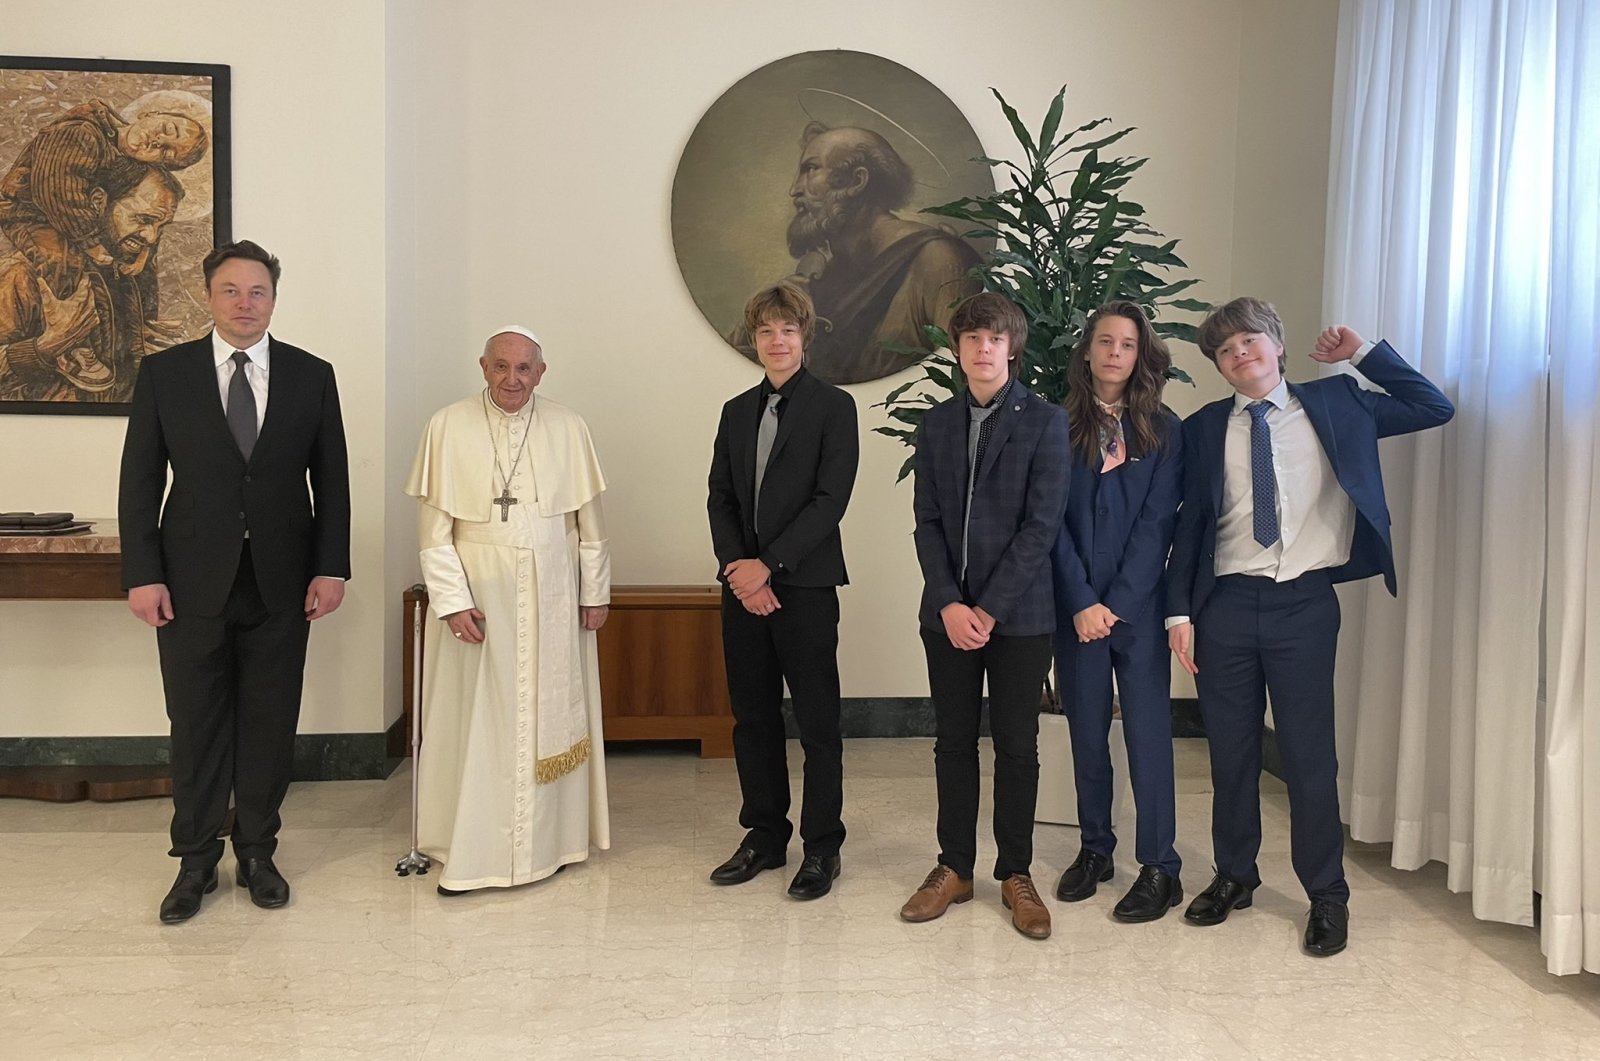 Elon Musk (L) poses for a photo with his four children and Pope Francis (2nd L). Musk on Friday night June 30, 2022, posted this picture, taken on June 29, 2022, on Twitter to announce his audience with the pope. (Reuters Photo)